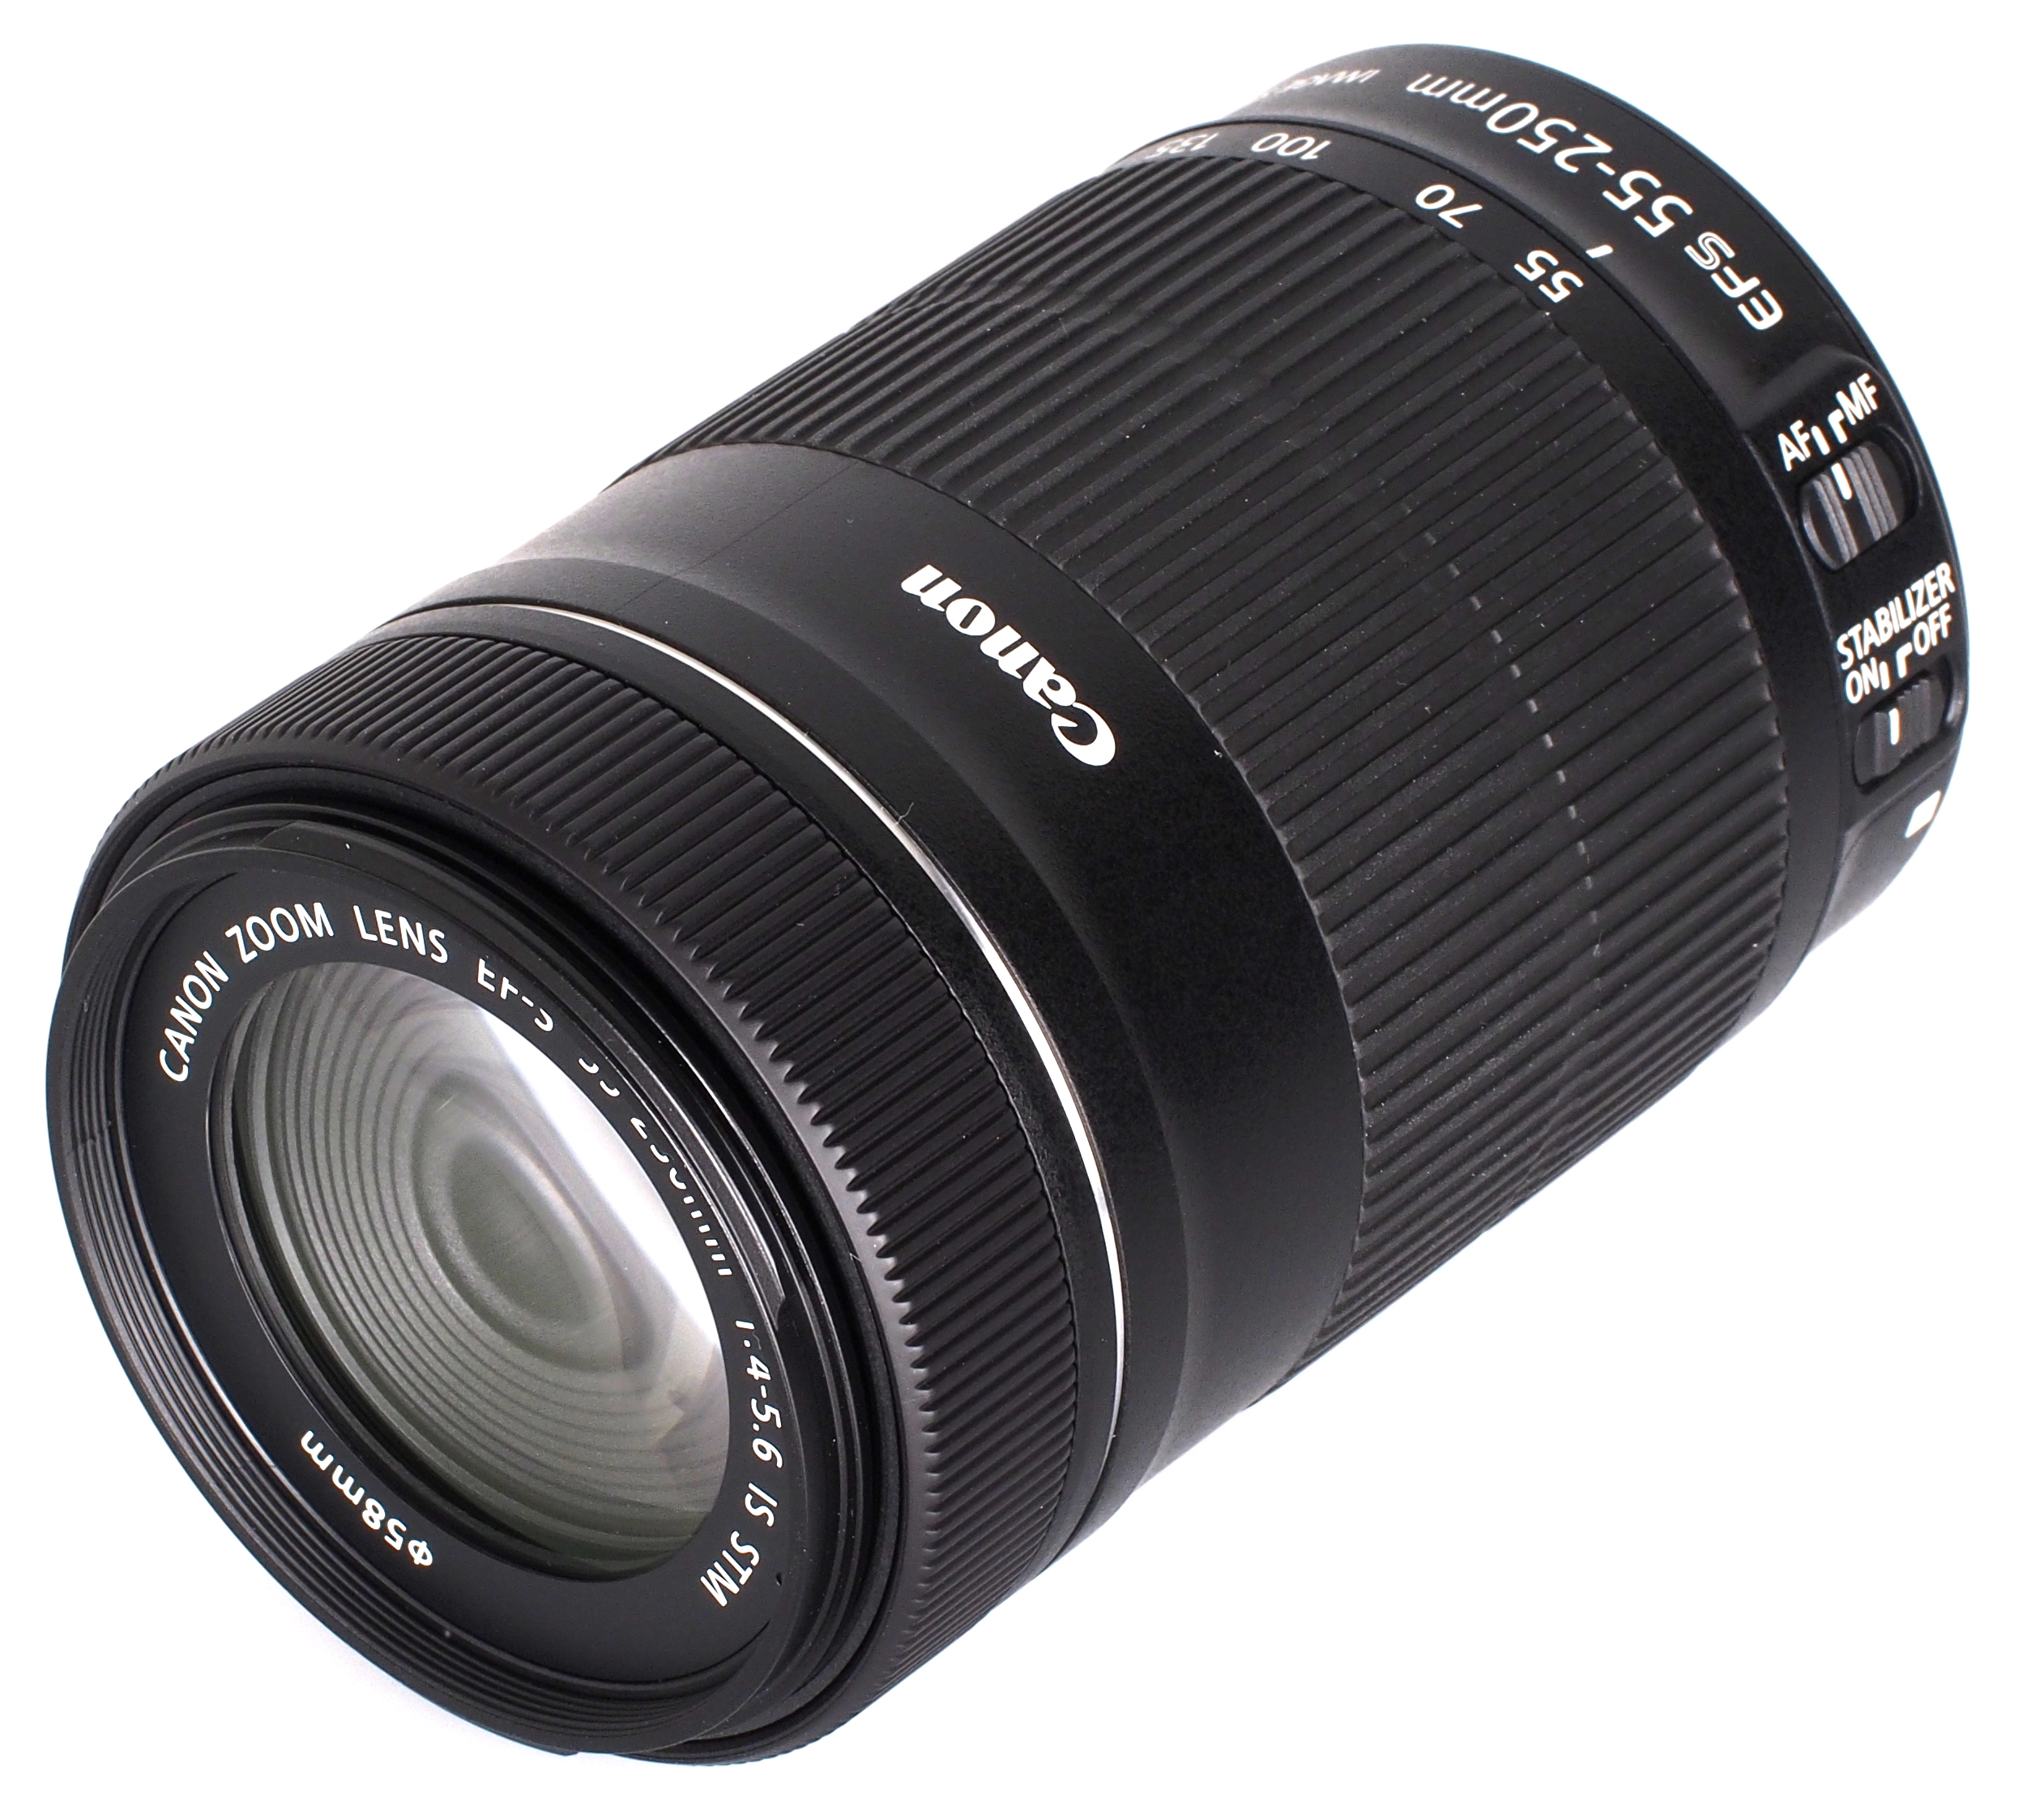 Canon EF-S 55-250mm f/4-5.6 IS STM Lens Review